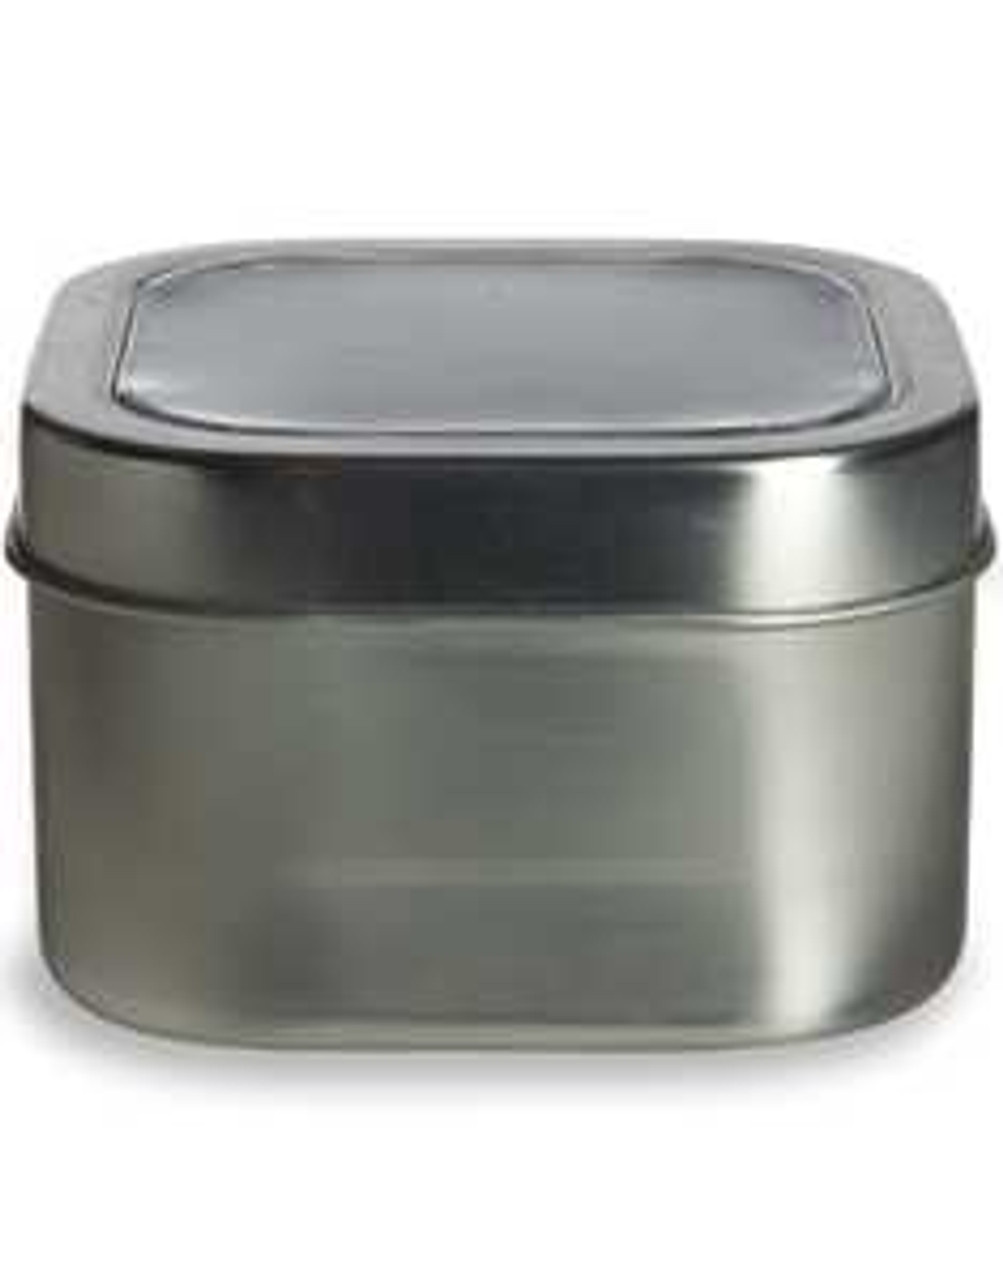 8 oz Square Tin Container with Clear Top Slip on Lid